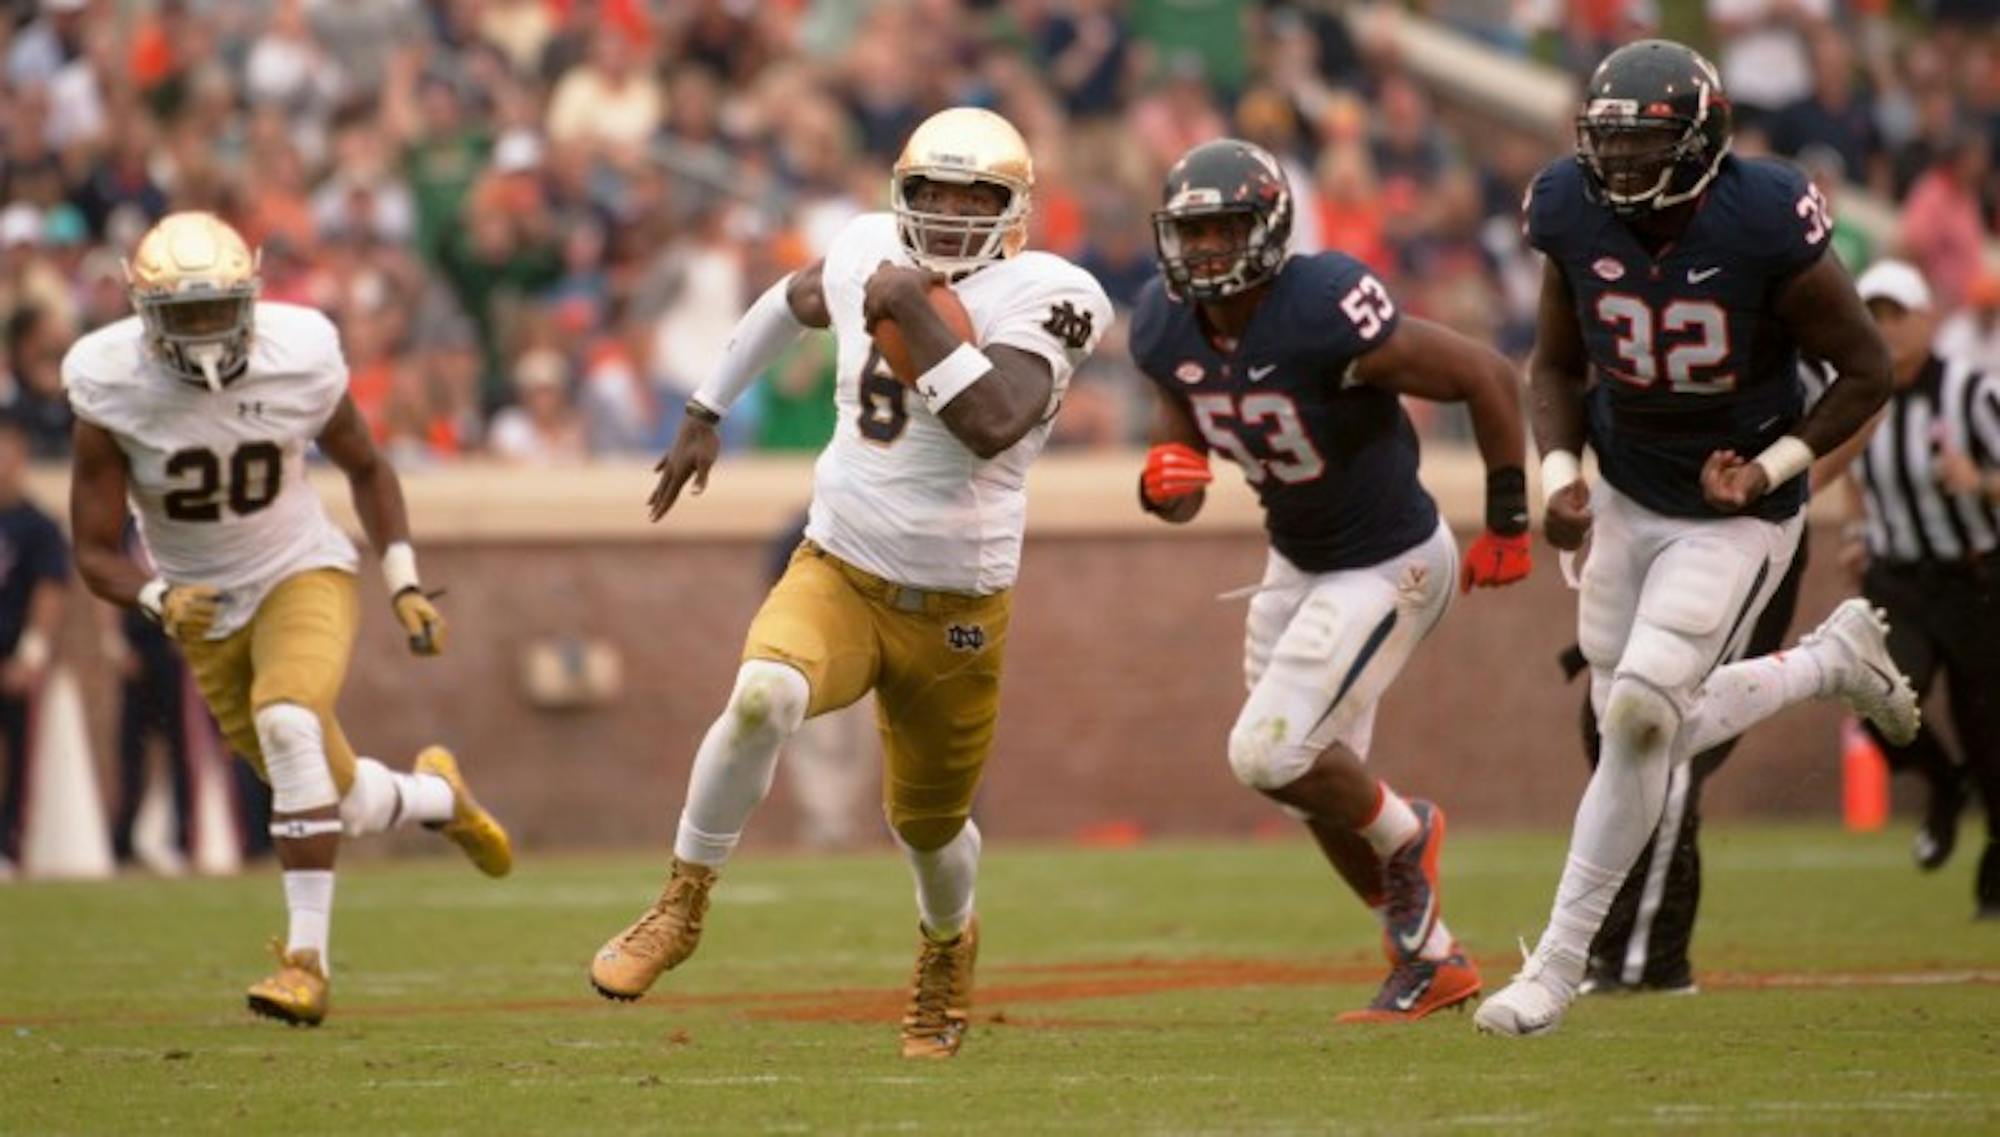 Irish senior quarterback Malik Zaire carries the ball during Notre Dame’s 34-27 win at Virginia on Sept. 12 at Scott Stadium. Zaire, who won the starting job last season, fractured his ankle in the victory.